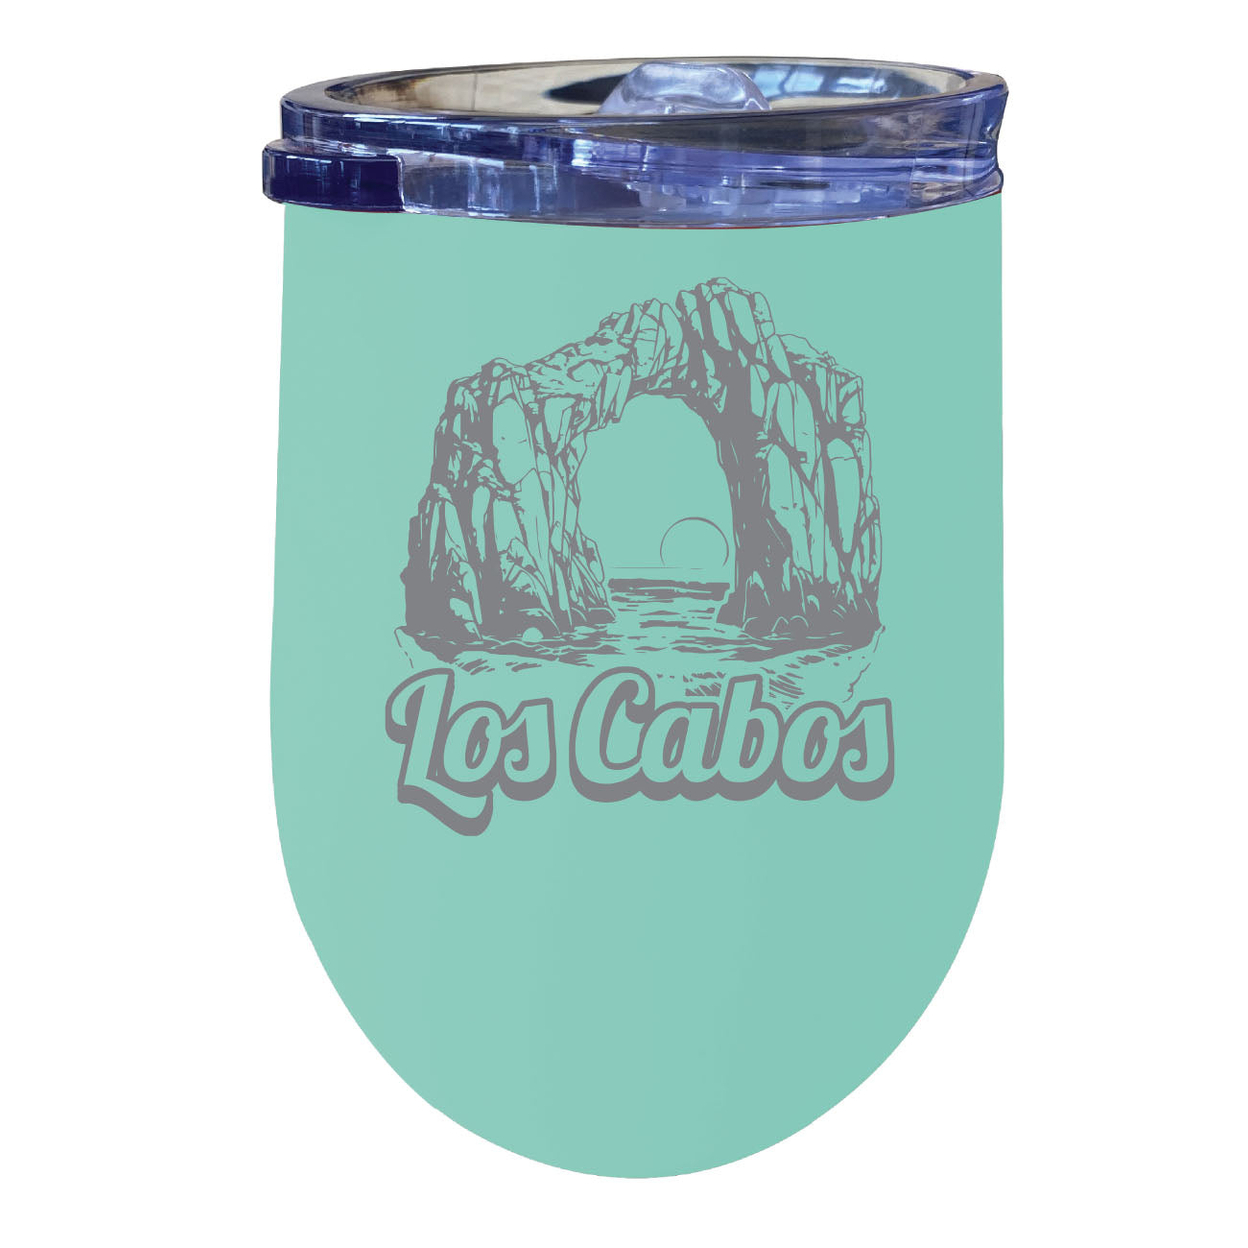 Los Cabos Mexico Souvenir 12 Oz Engraved Insulated Wine Stainless Steel Tumbler - Rainbow Glitter Gray,,2-Pack